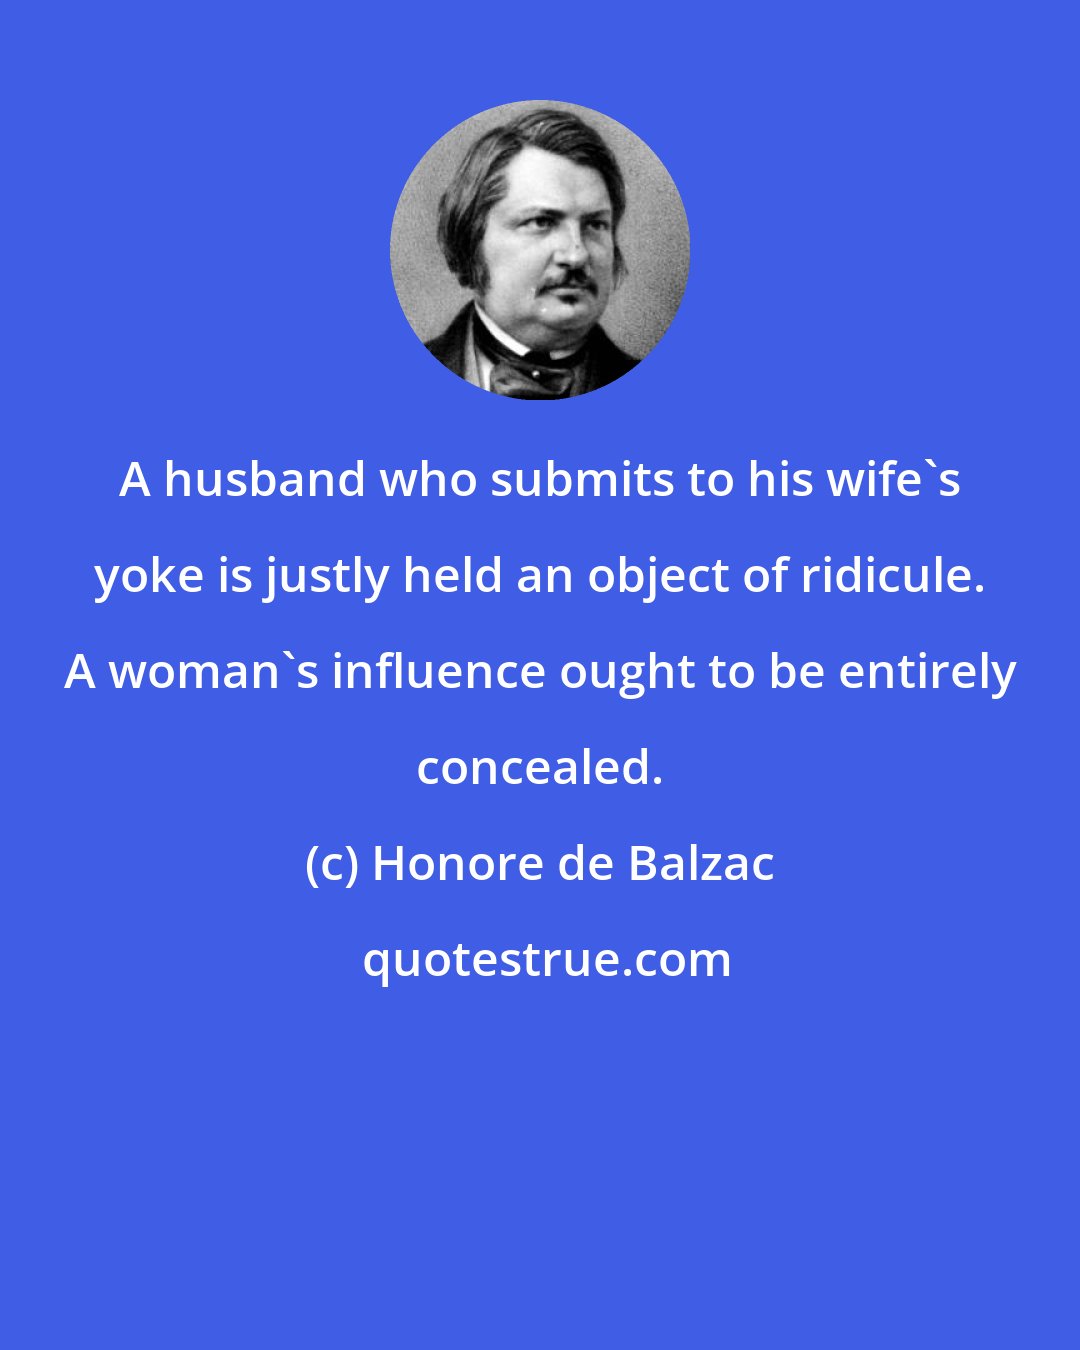 Honore de Balzac: A husband who submits to his wife's yoke is justly held an object of ridicule. A woman's influence ought to be entirely concealed.